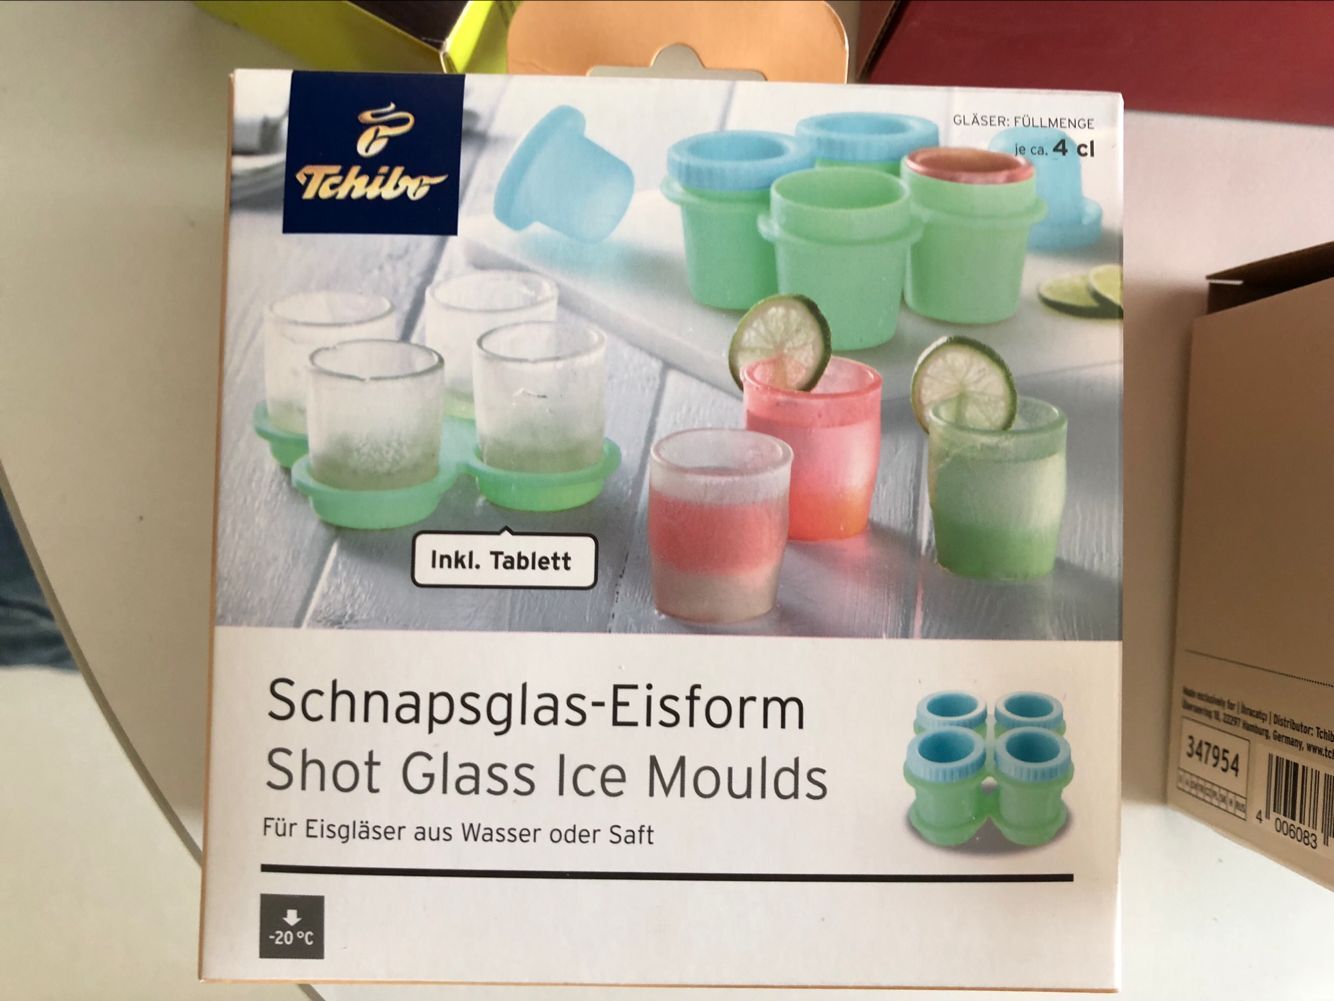 Shot Glass Ice Moulds